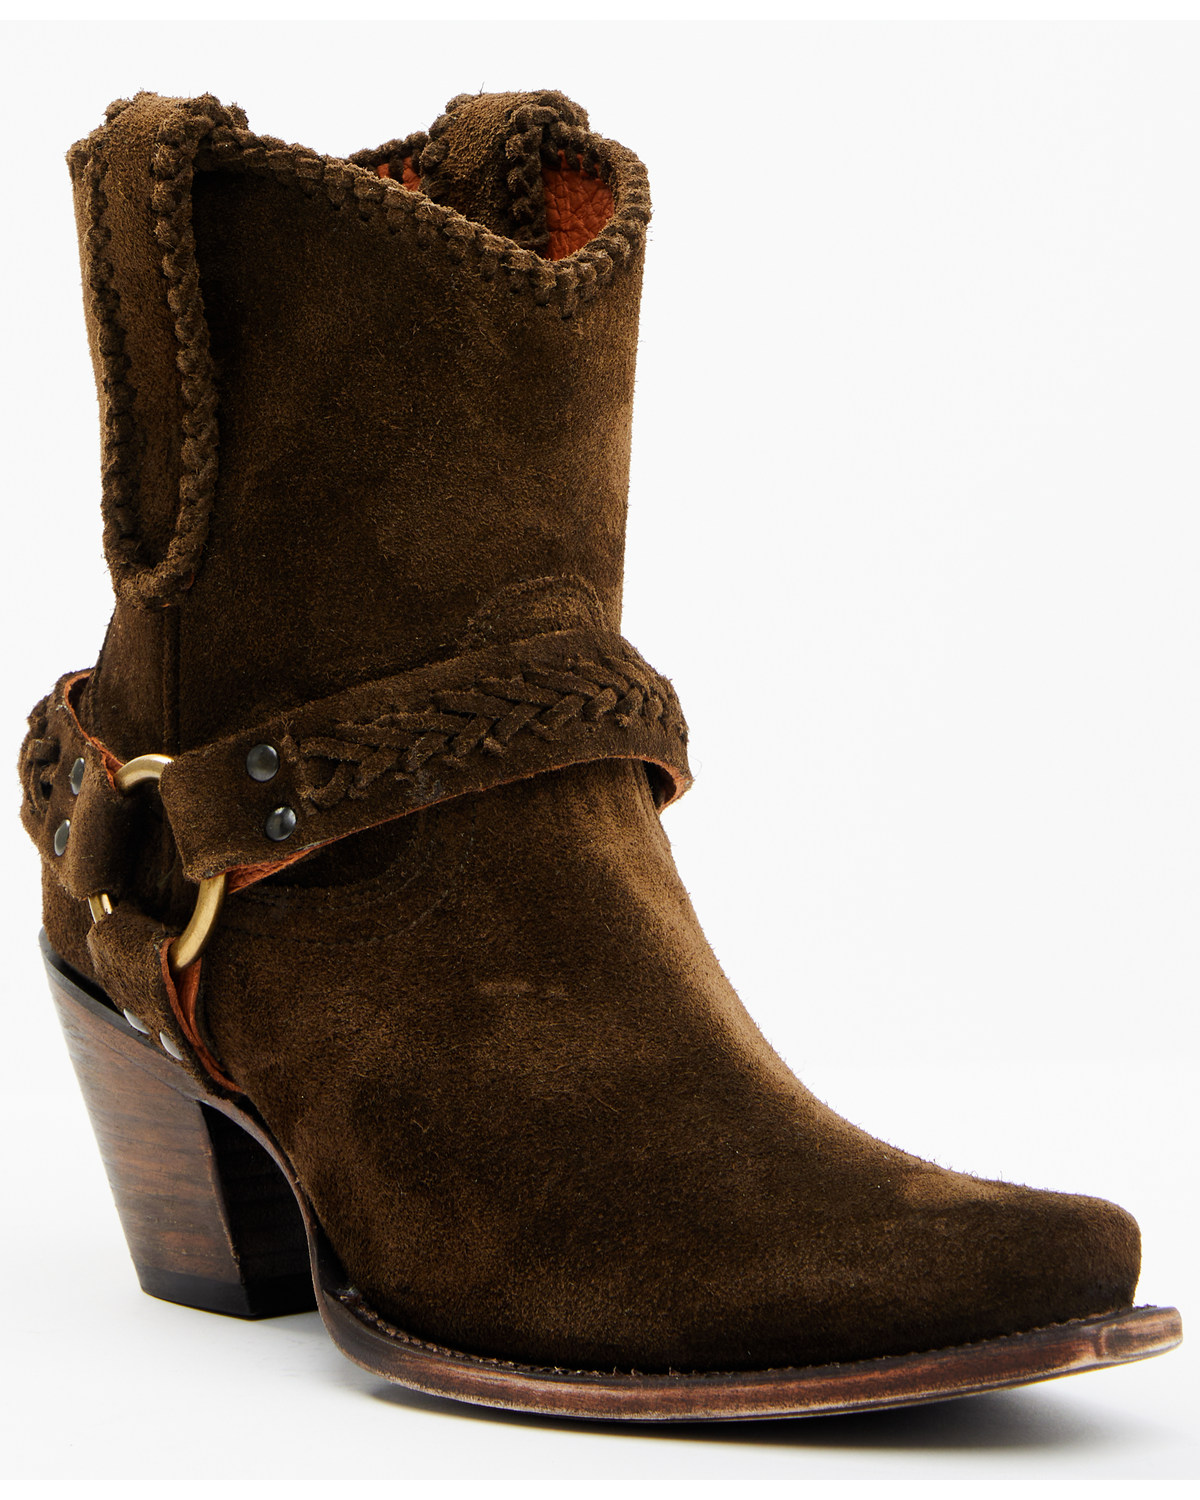 Cleo + Wolf Women's Willow Western Fashion Booties - Snip Toe